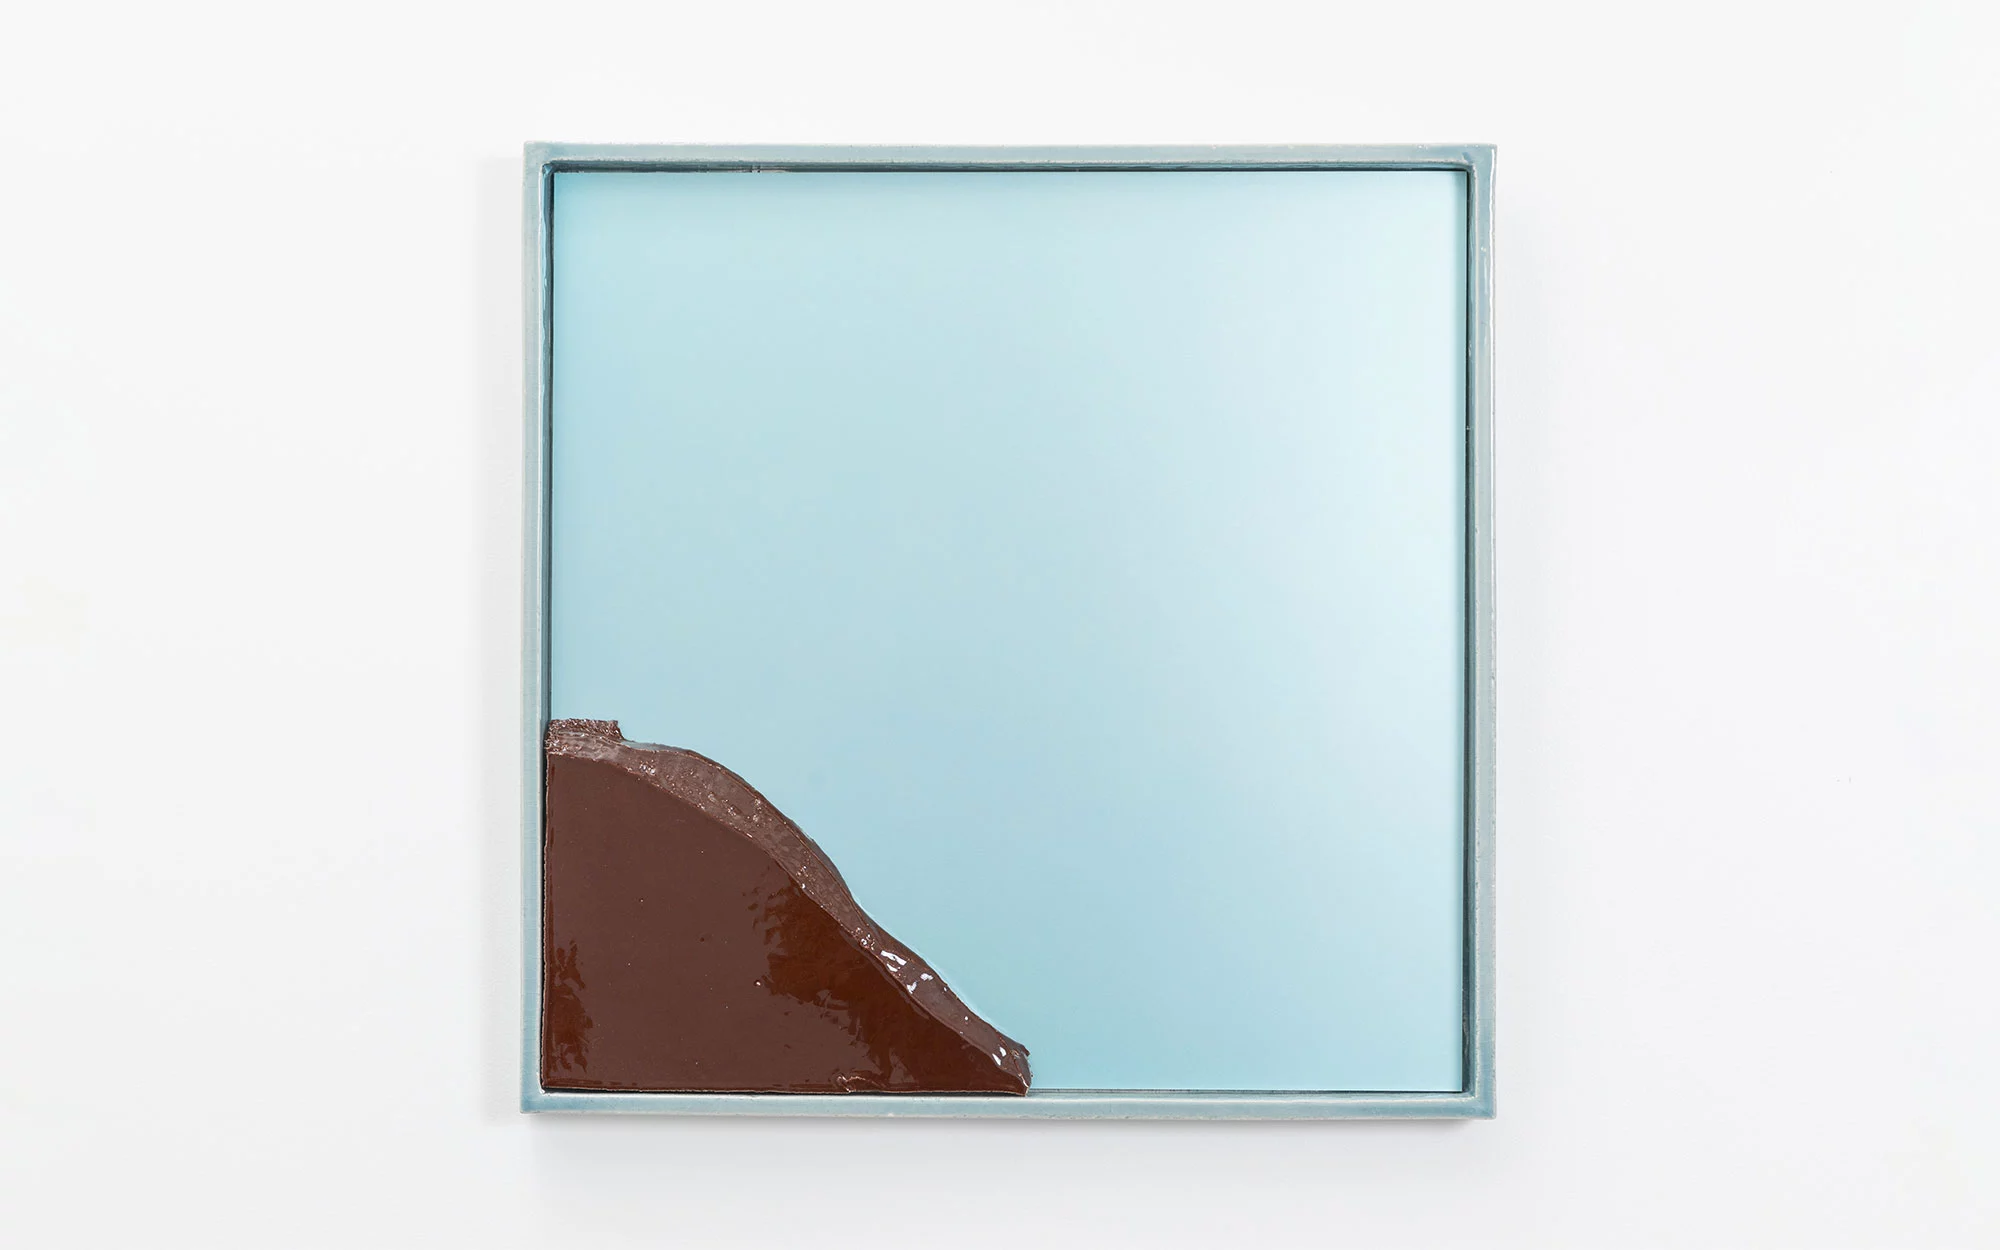 Bas-Relief SQUARE - Ronan Bouroullec - Mirror - Galerie kreo